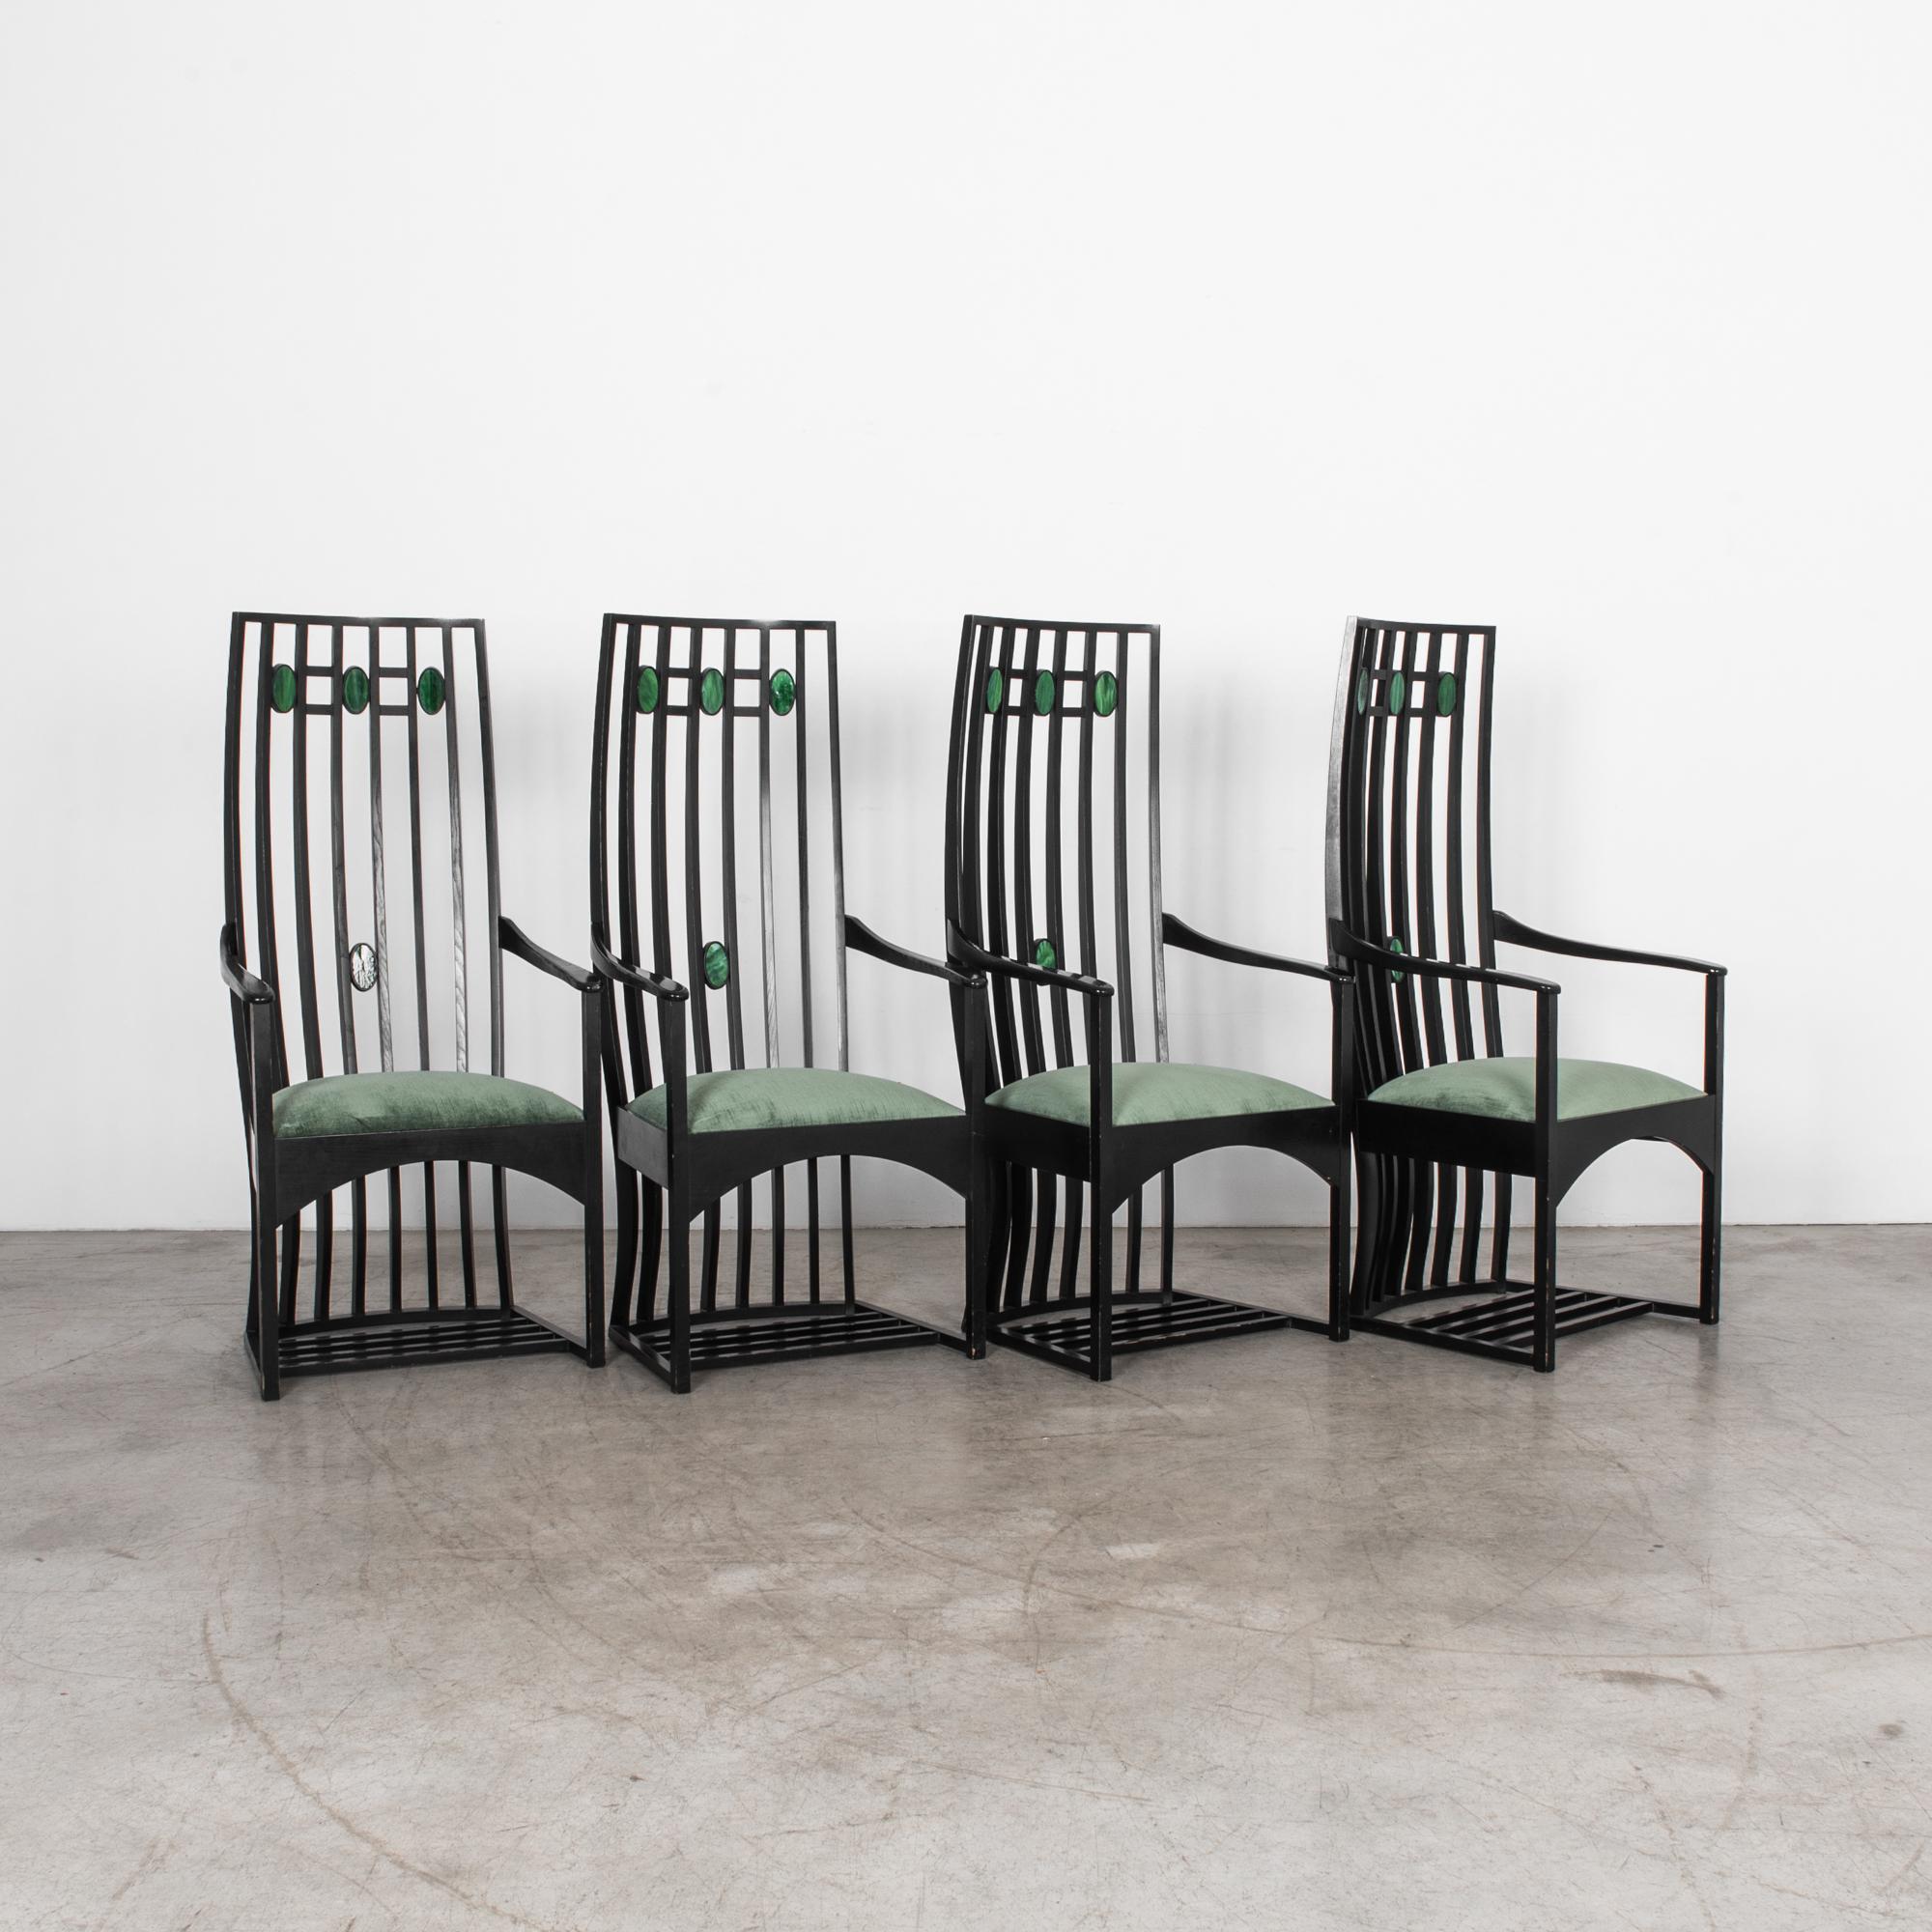 Attributed to Scottish architect Charles Rennie Mackintosh. This set of 4 armchairs are solidly constructed from European oak, with inset agate stones, and updated green velvet upholstery. Bold organic structure illustrates the linearity and